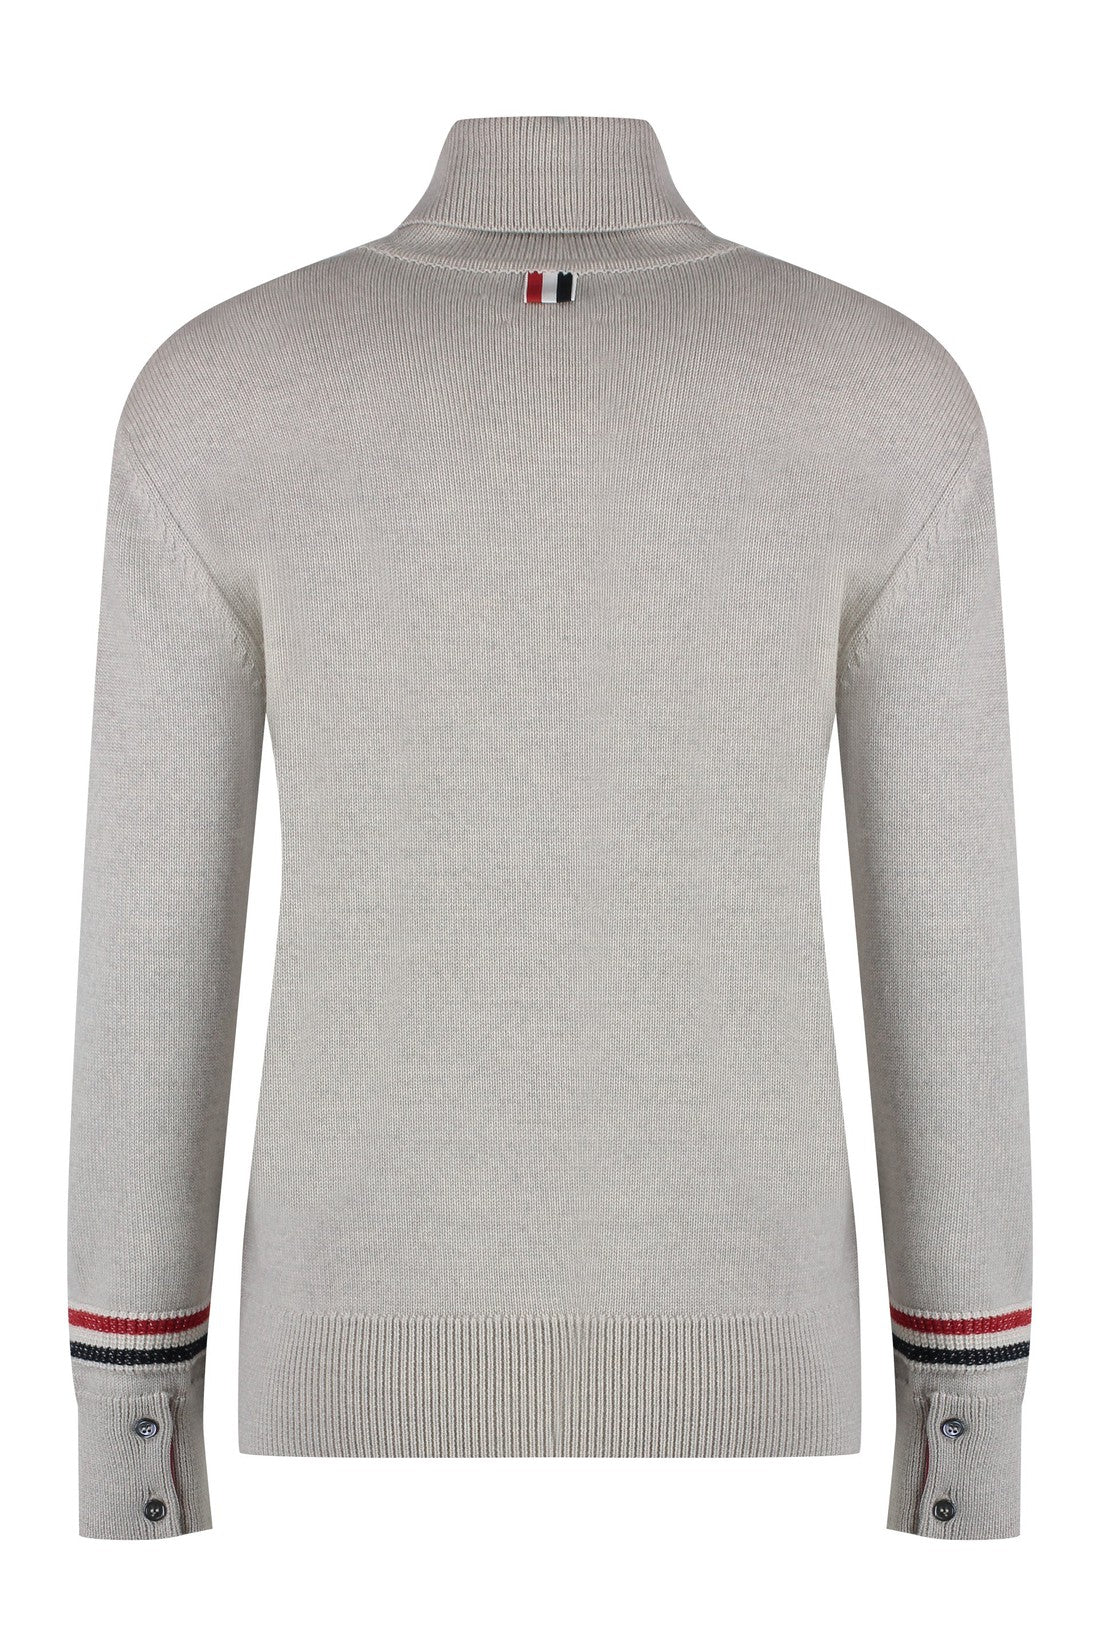 Thom Browne-OUTLET-SALE-Wool turtleneck sweater-ARCHIVIST